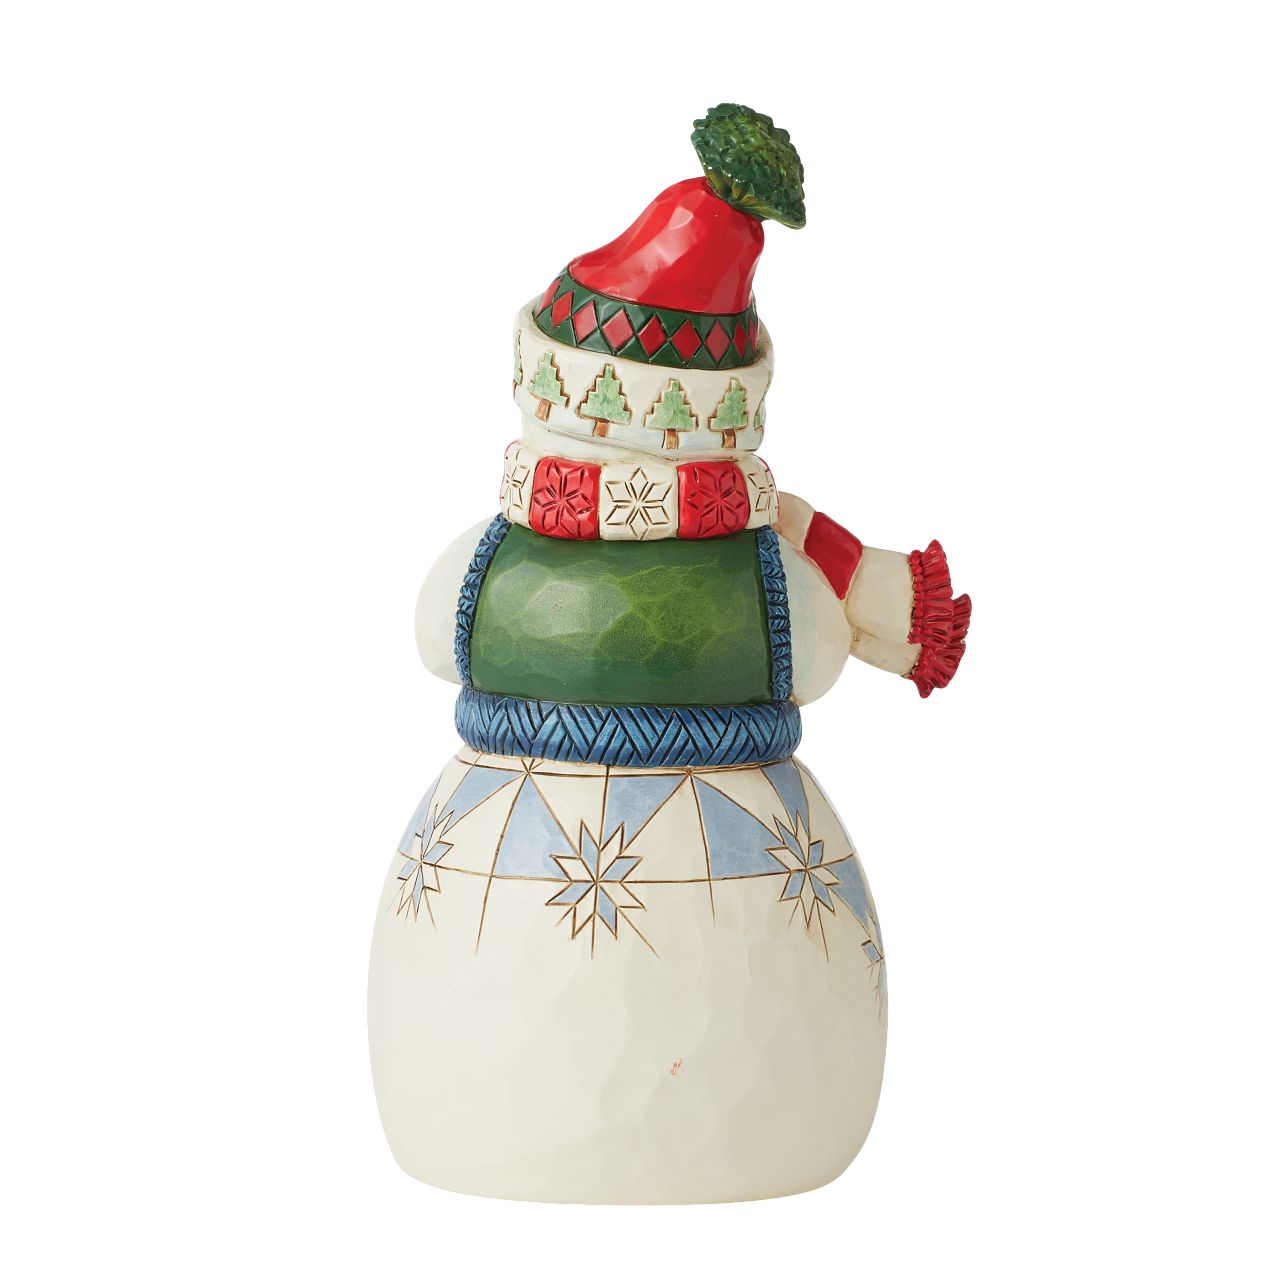 Jim Shore Cozy Snowman Figurine  Brightly Dressed in his warm winter wear this 2022 Hallmark Exclusive snowman enjoys a delicious steaming cup of cocoa with marshmallows on top to shield against the winter chill.